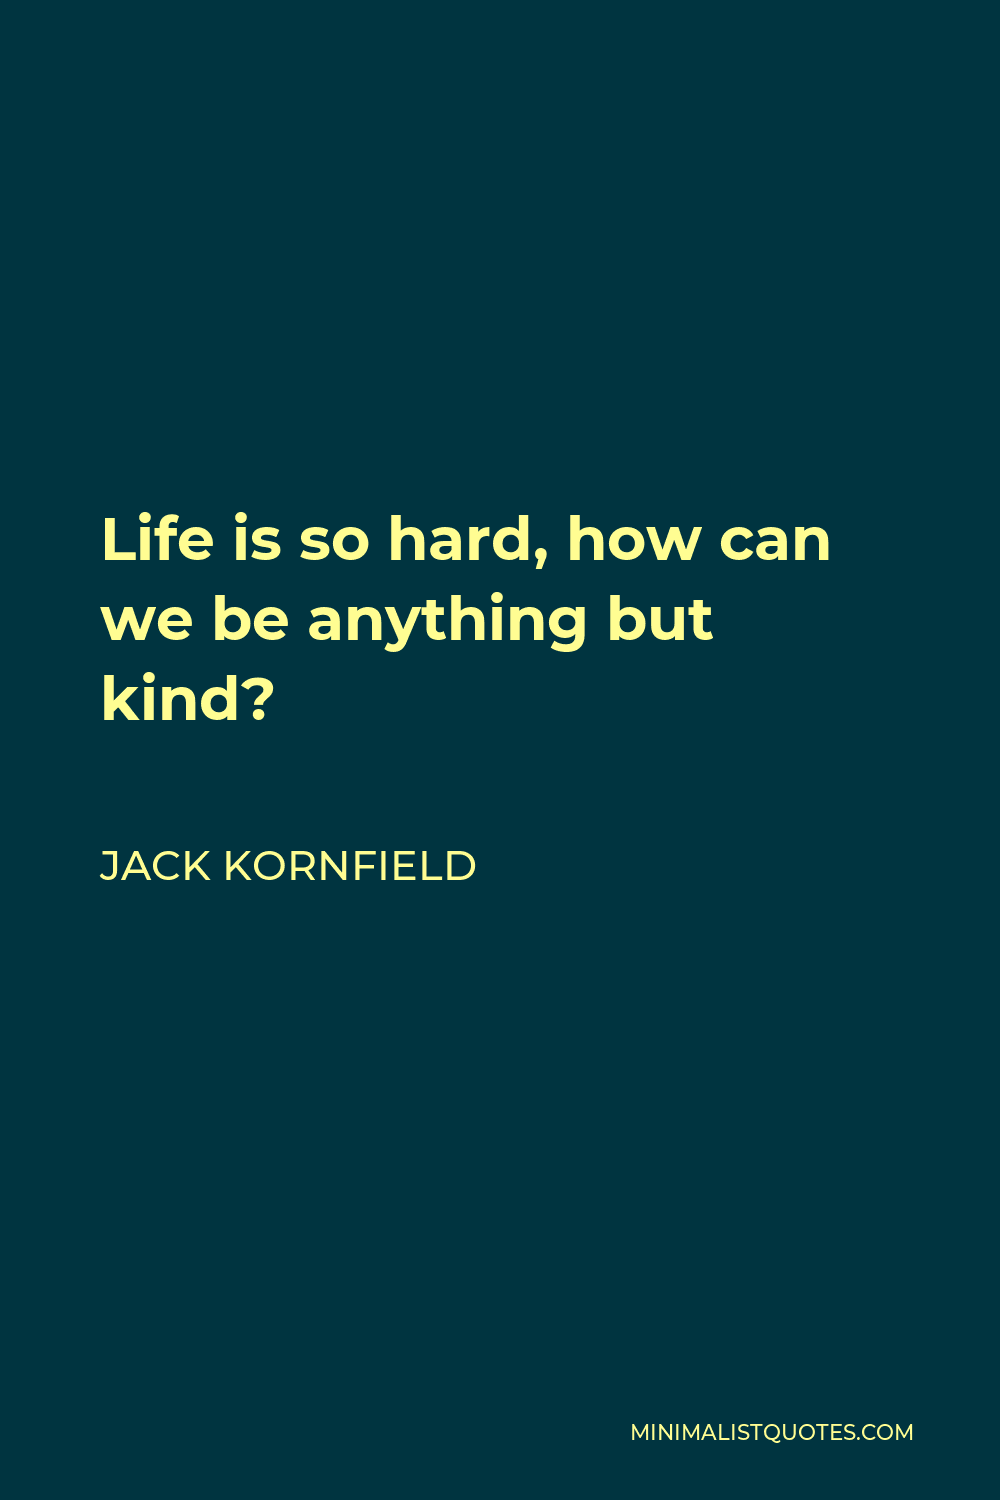 Jack Kornfield Quote - Life is so hard, how can we be anything but kind?